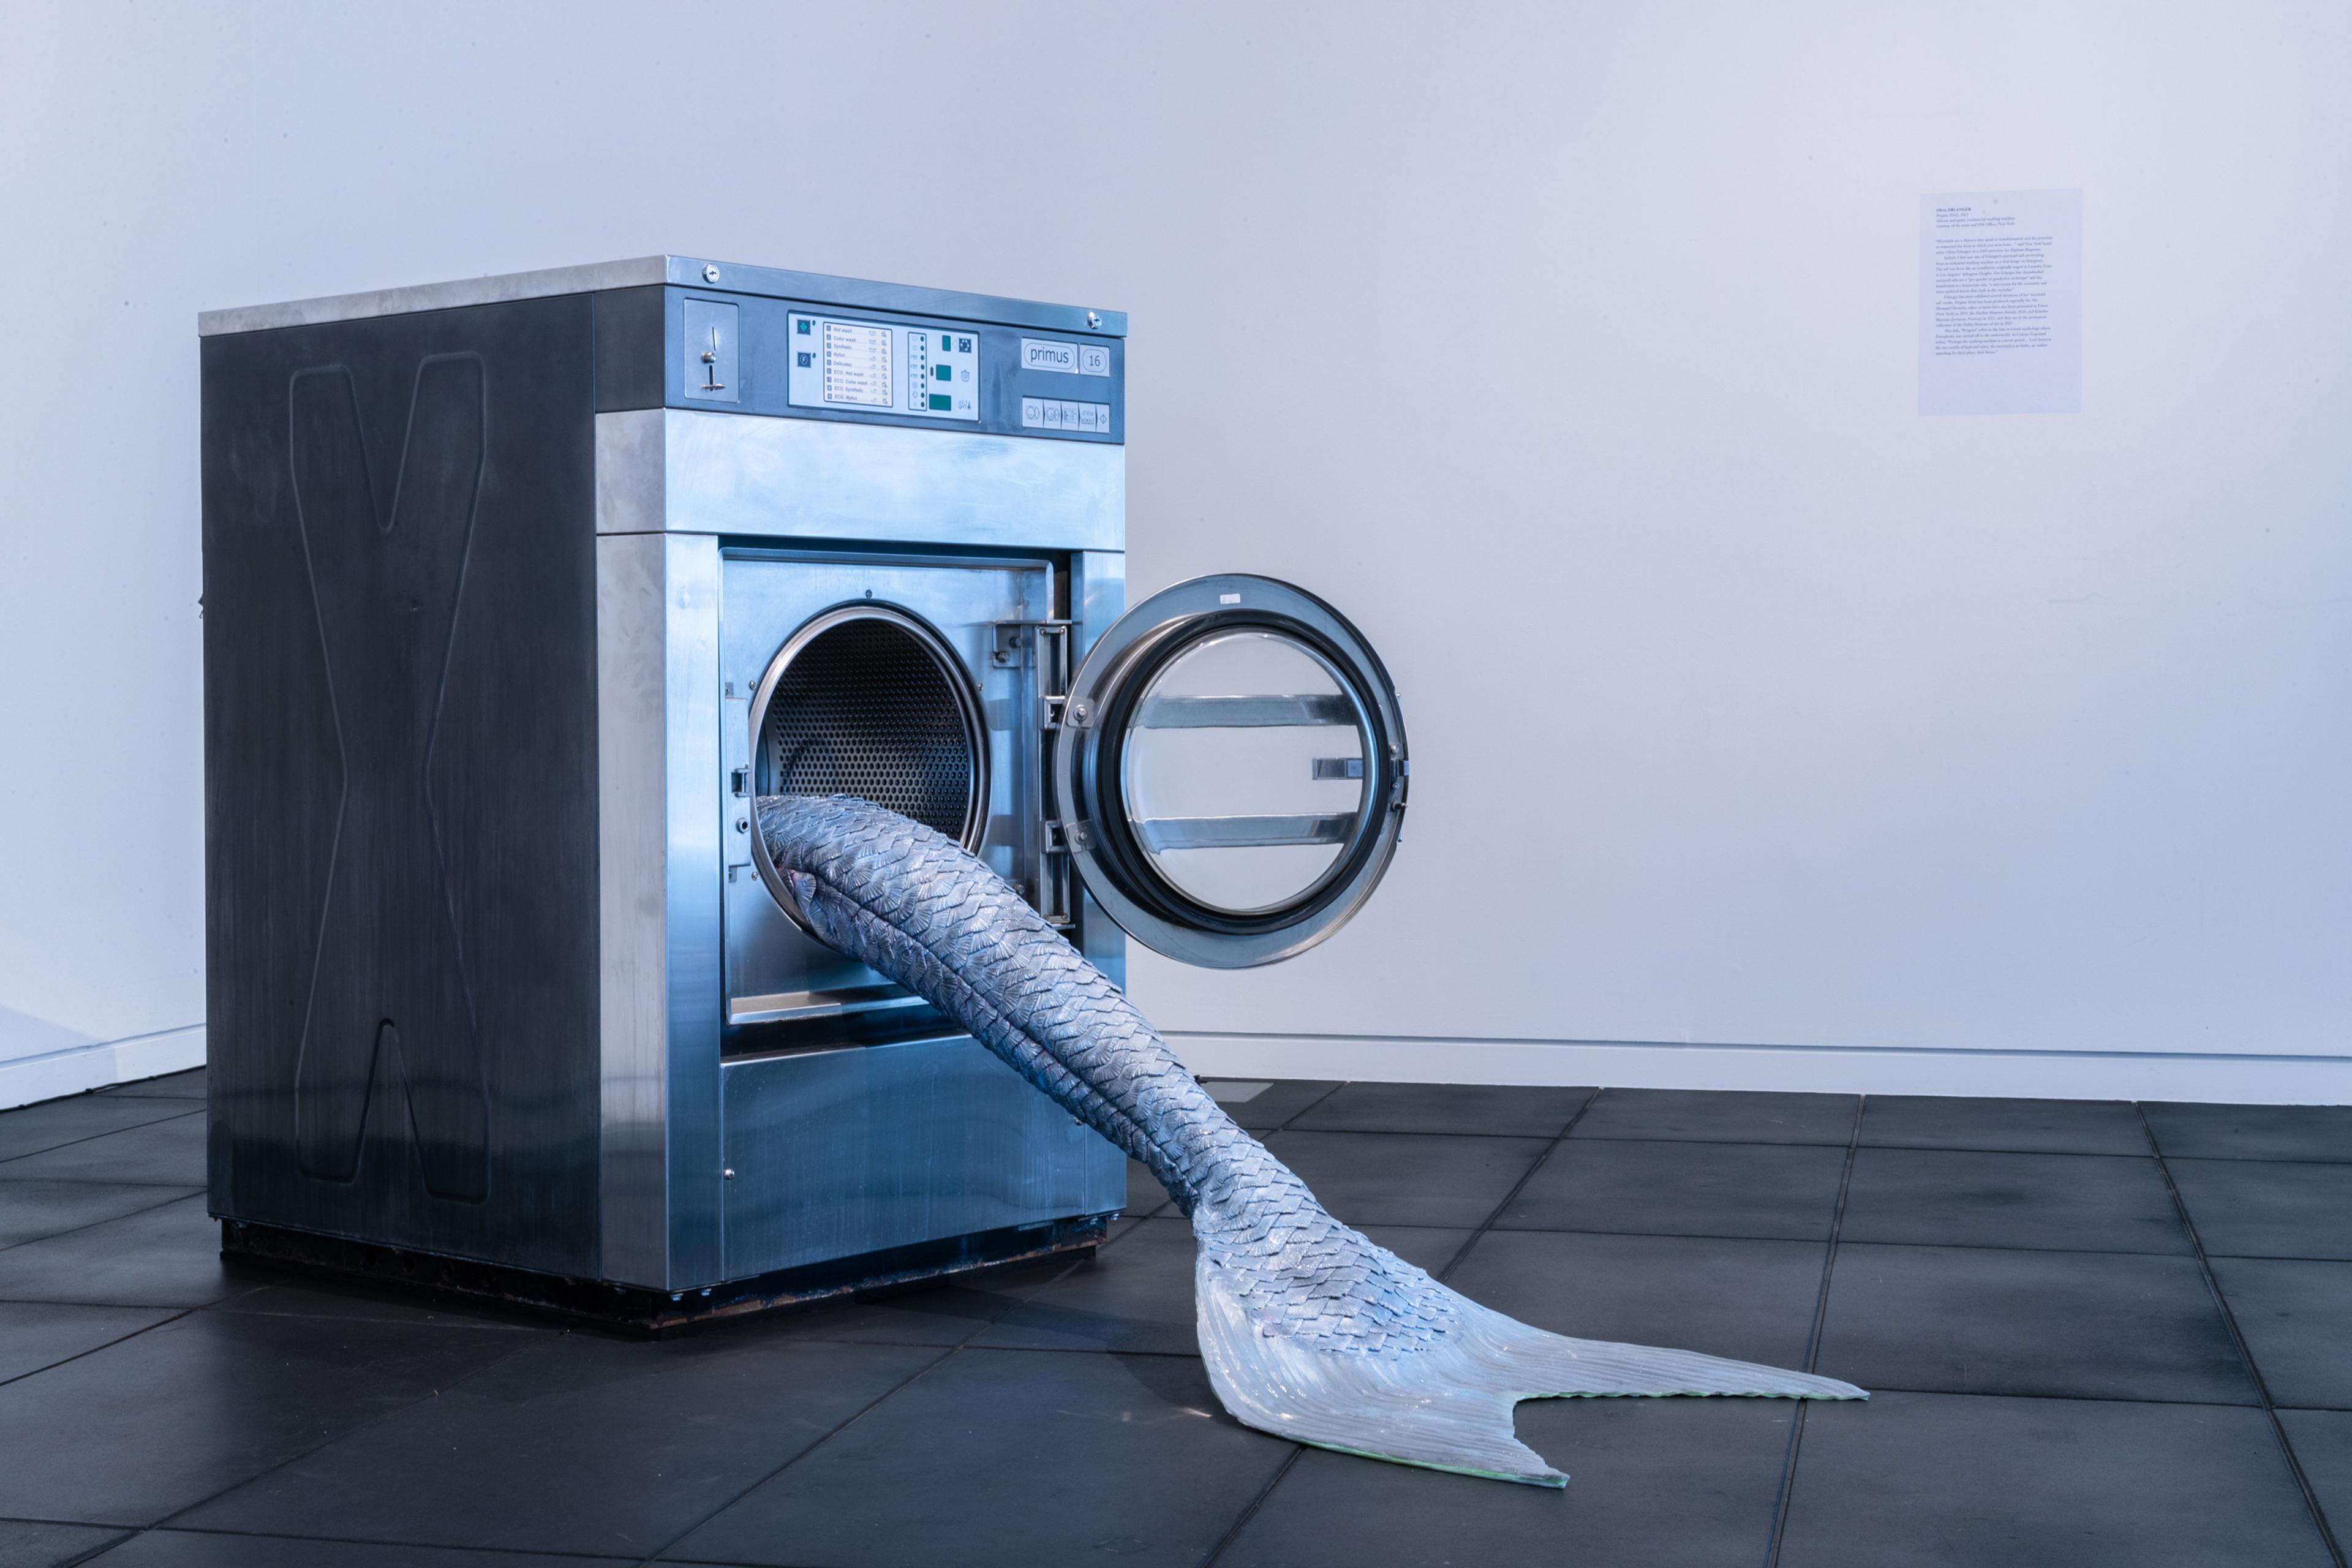 Olivia Erlanger, Pergusa (Gris), 2022, silicone and paint, commercial washing machine, courtesy of the artist and DM Office, New York. Installation view, Megan Dunn: The Mermaid Chronicles, Te Pātaka Toi Adam Art Gallery, Te Herenga Waka Victoria University of Wellington, 2022. Photo: Ted Whitaker